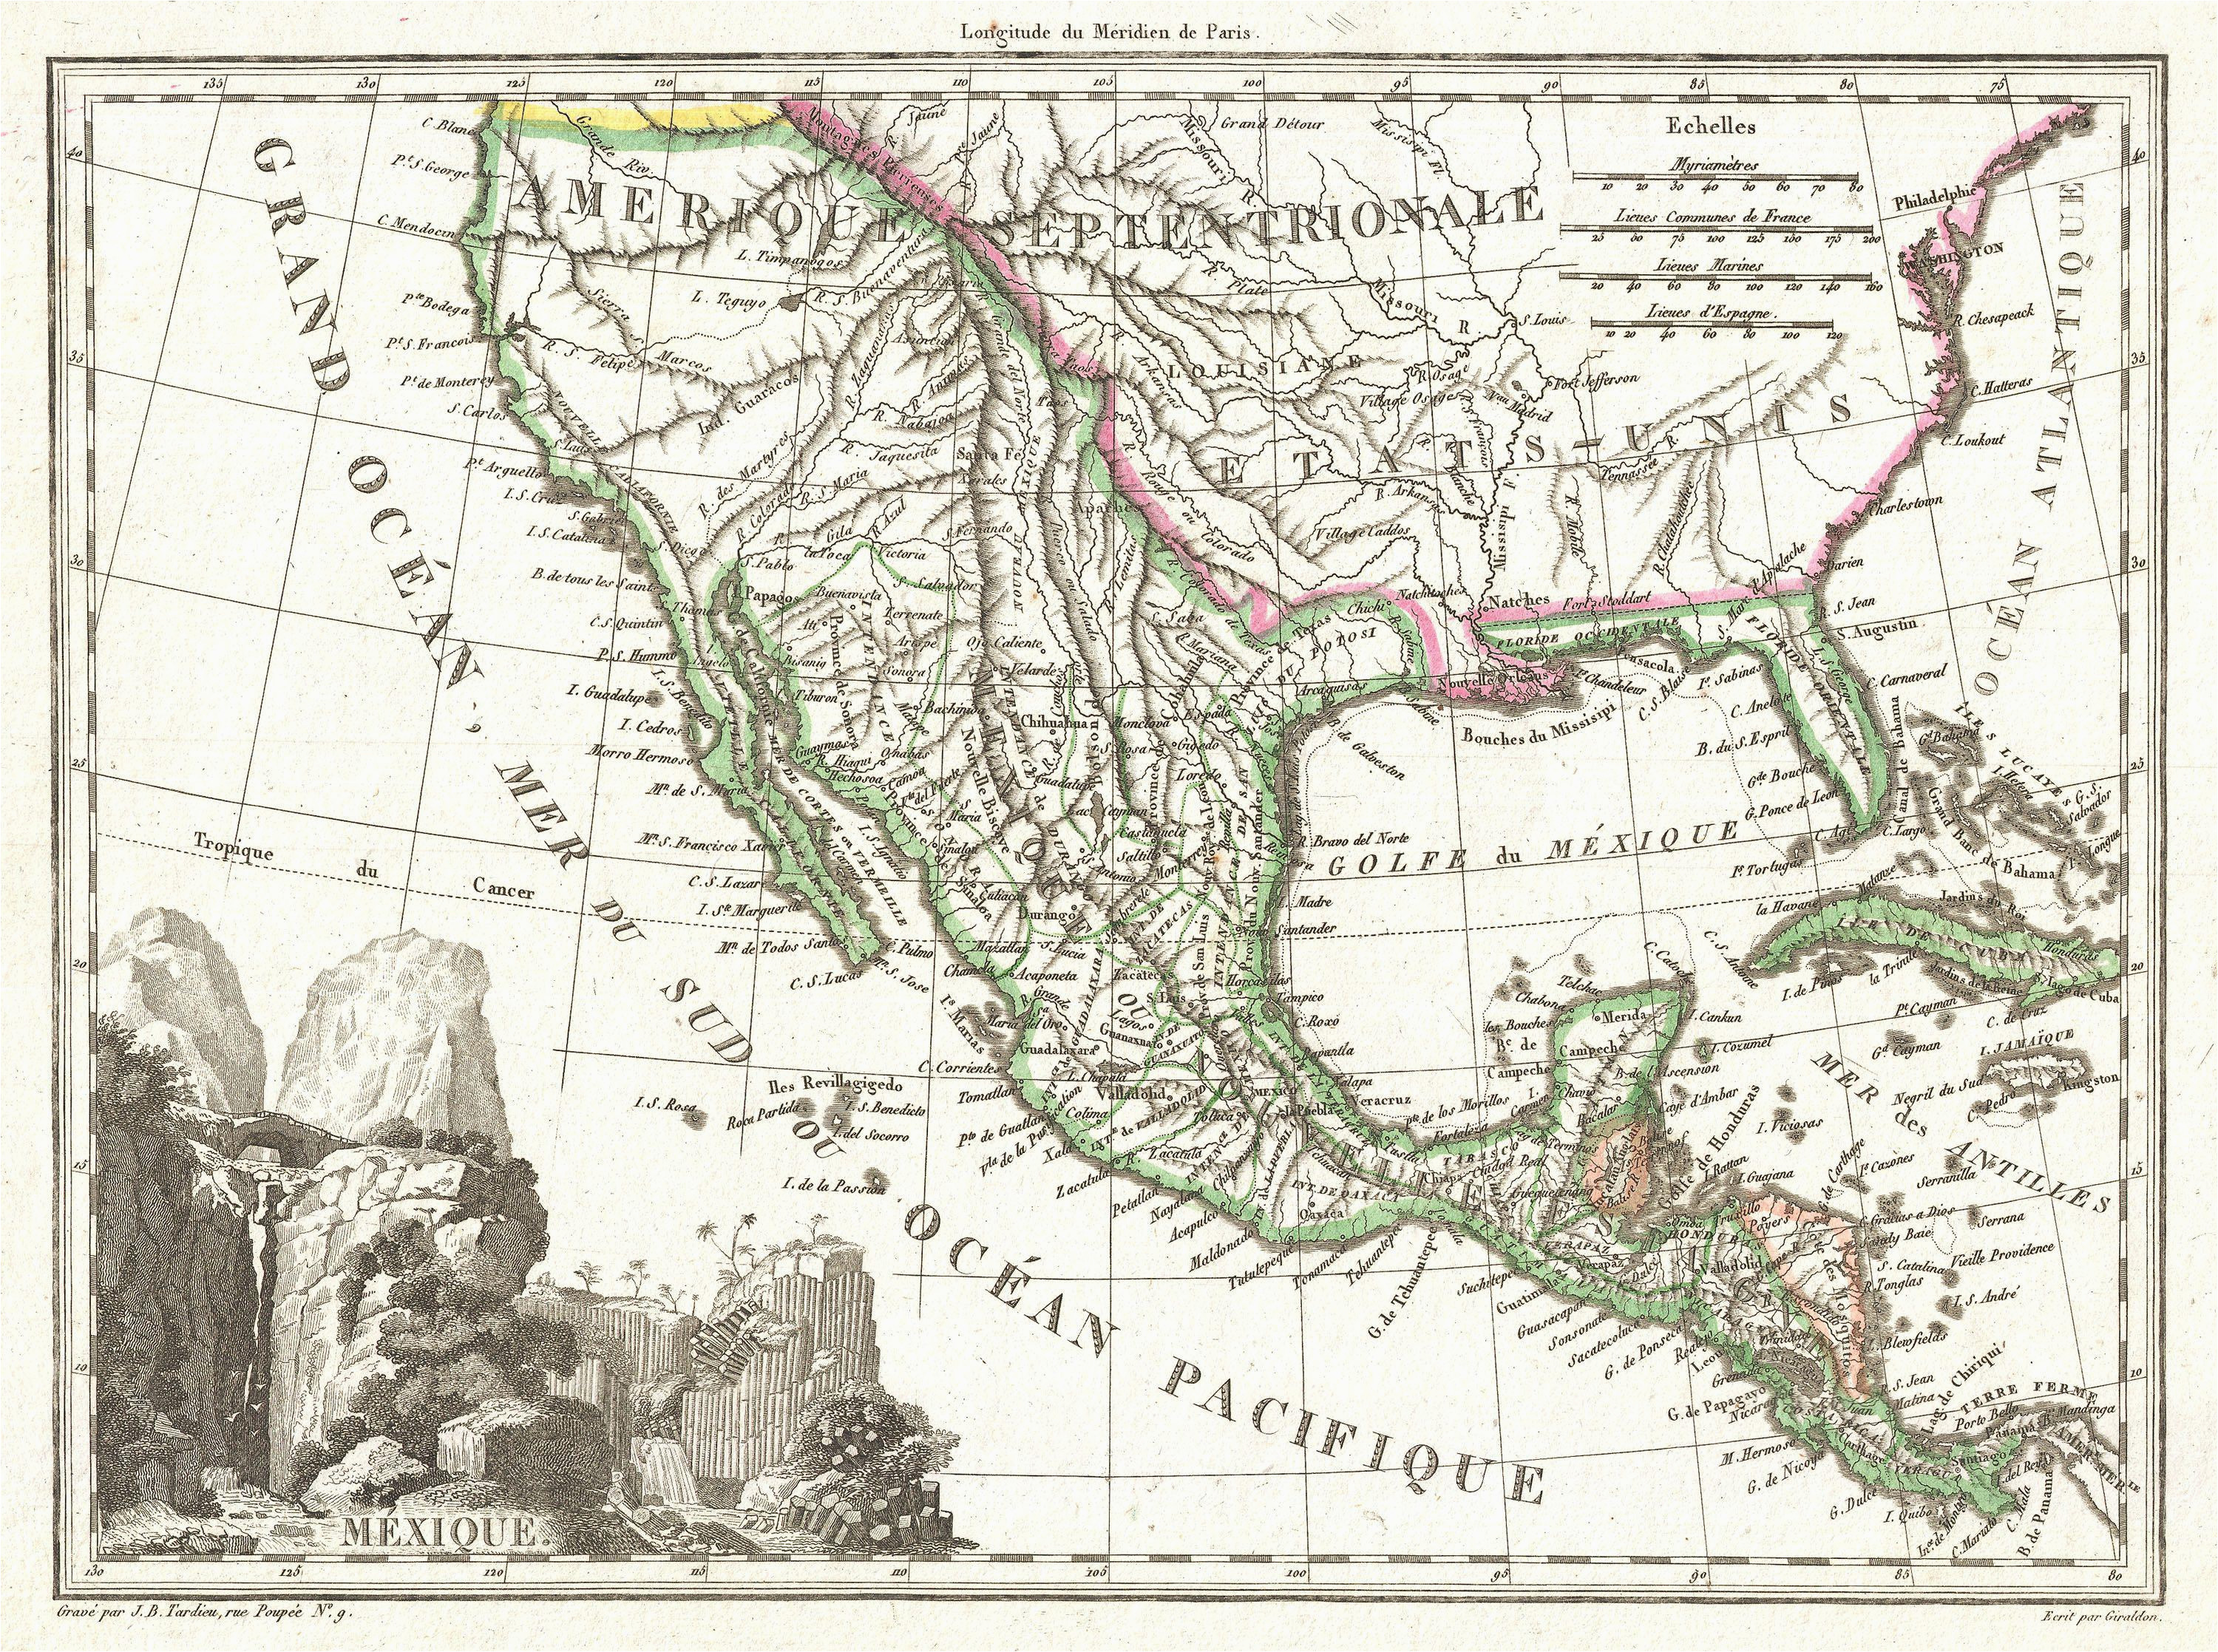 Texas Mexico Border Map File 1810 Tardieu Map Of Mexico Texas and California Geographicus